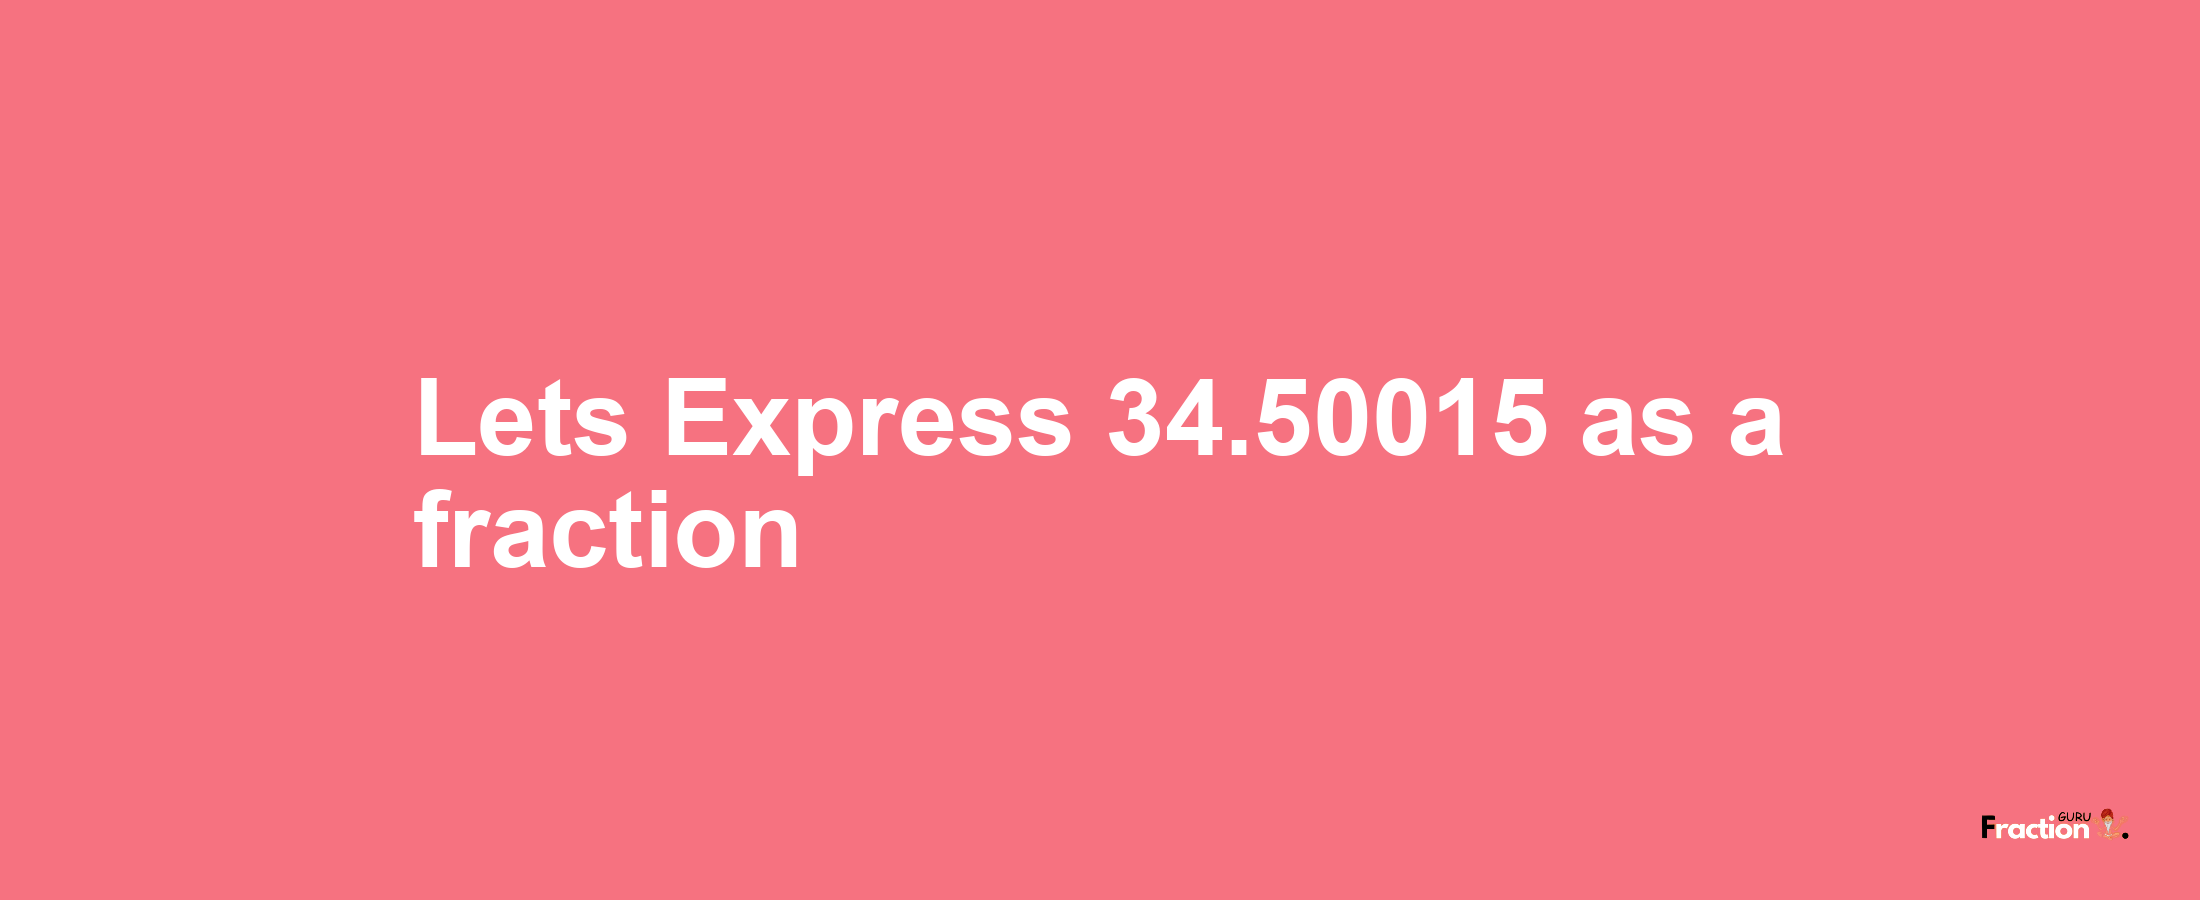 Lets Express 34.50015 as afraction